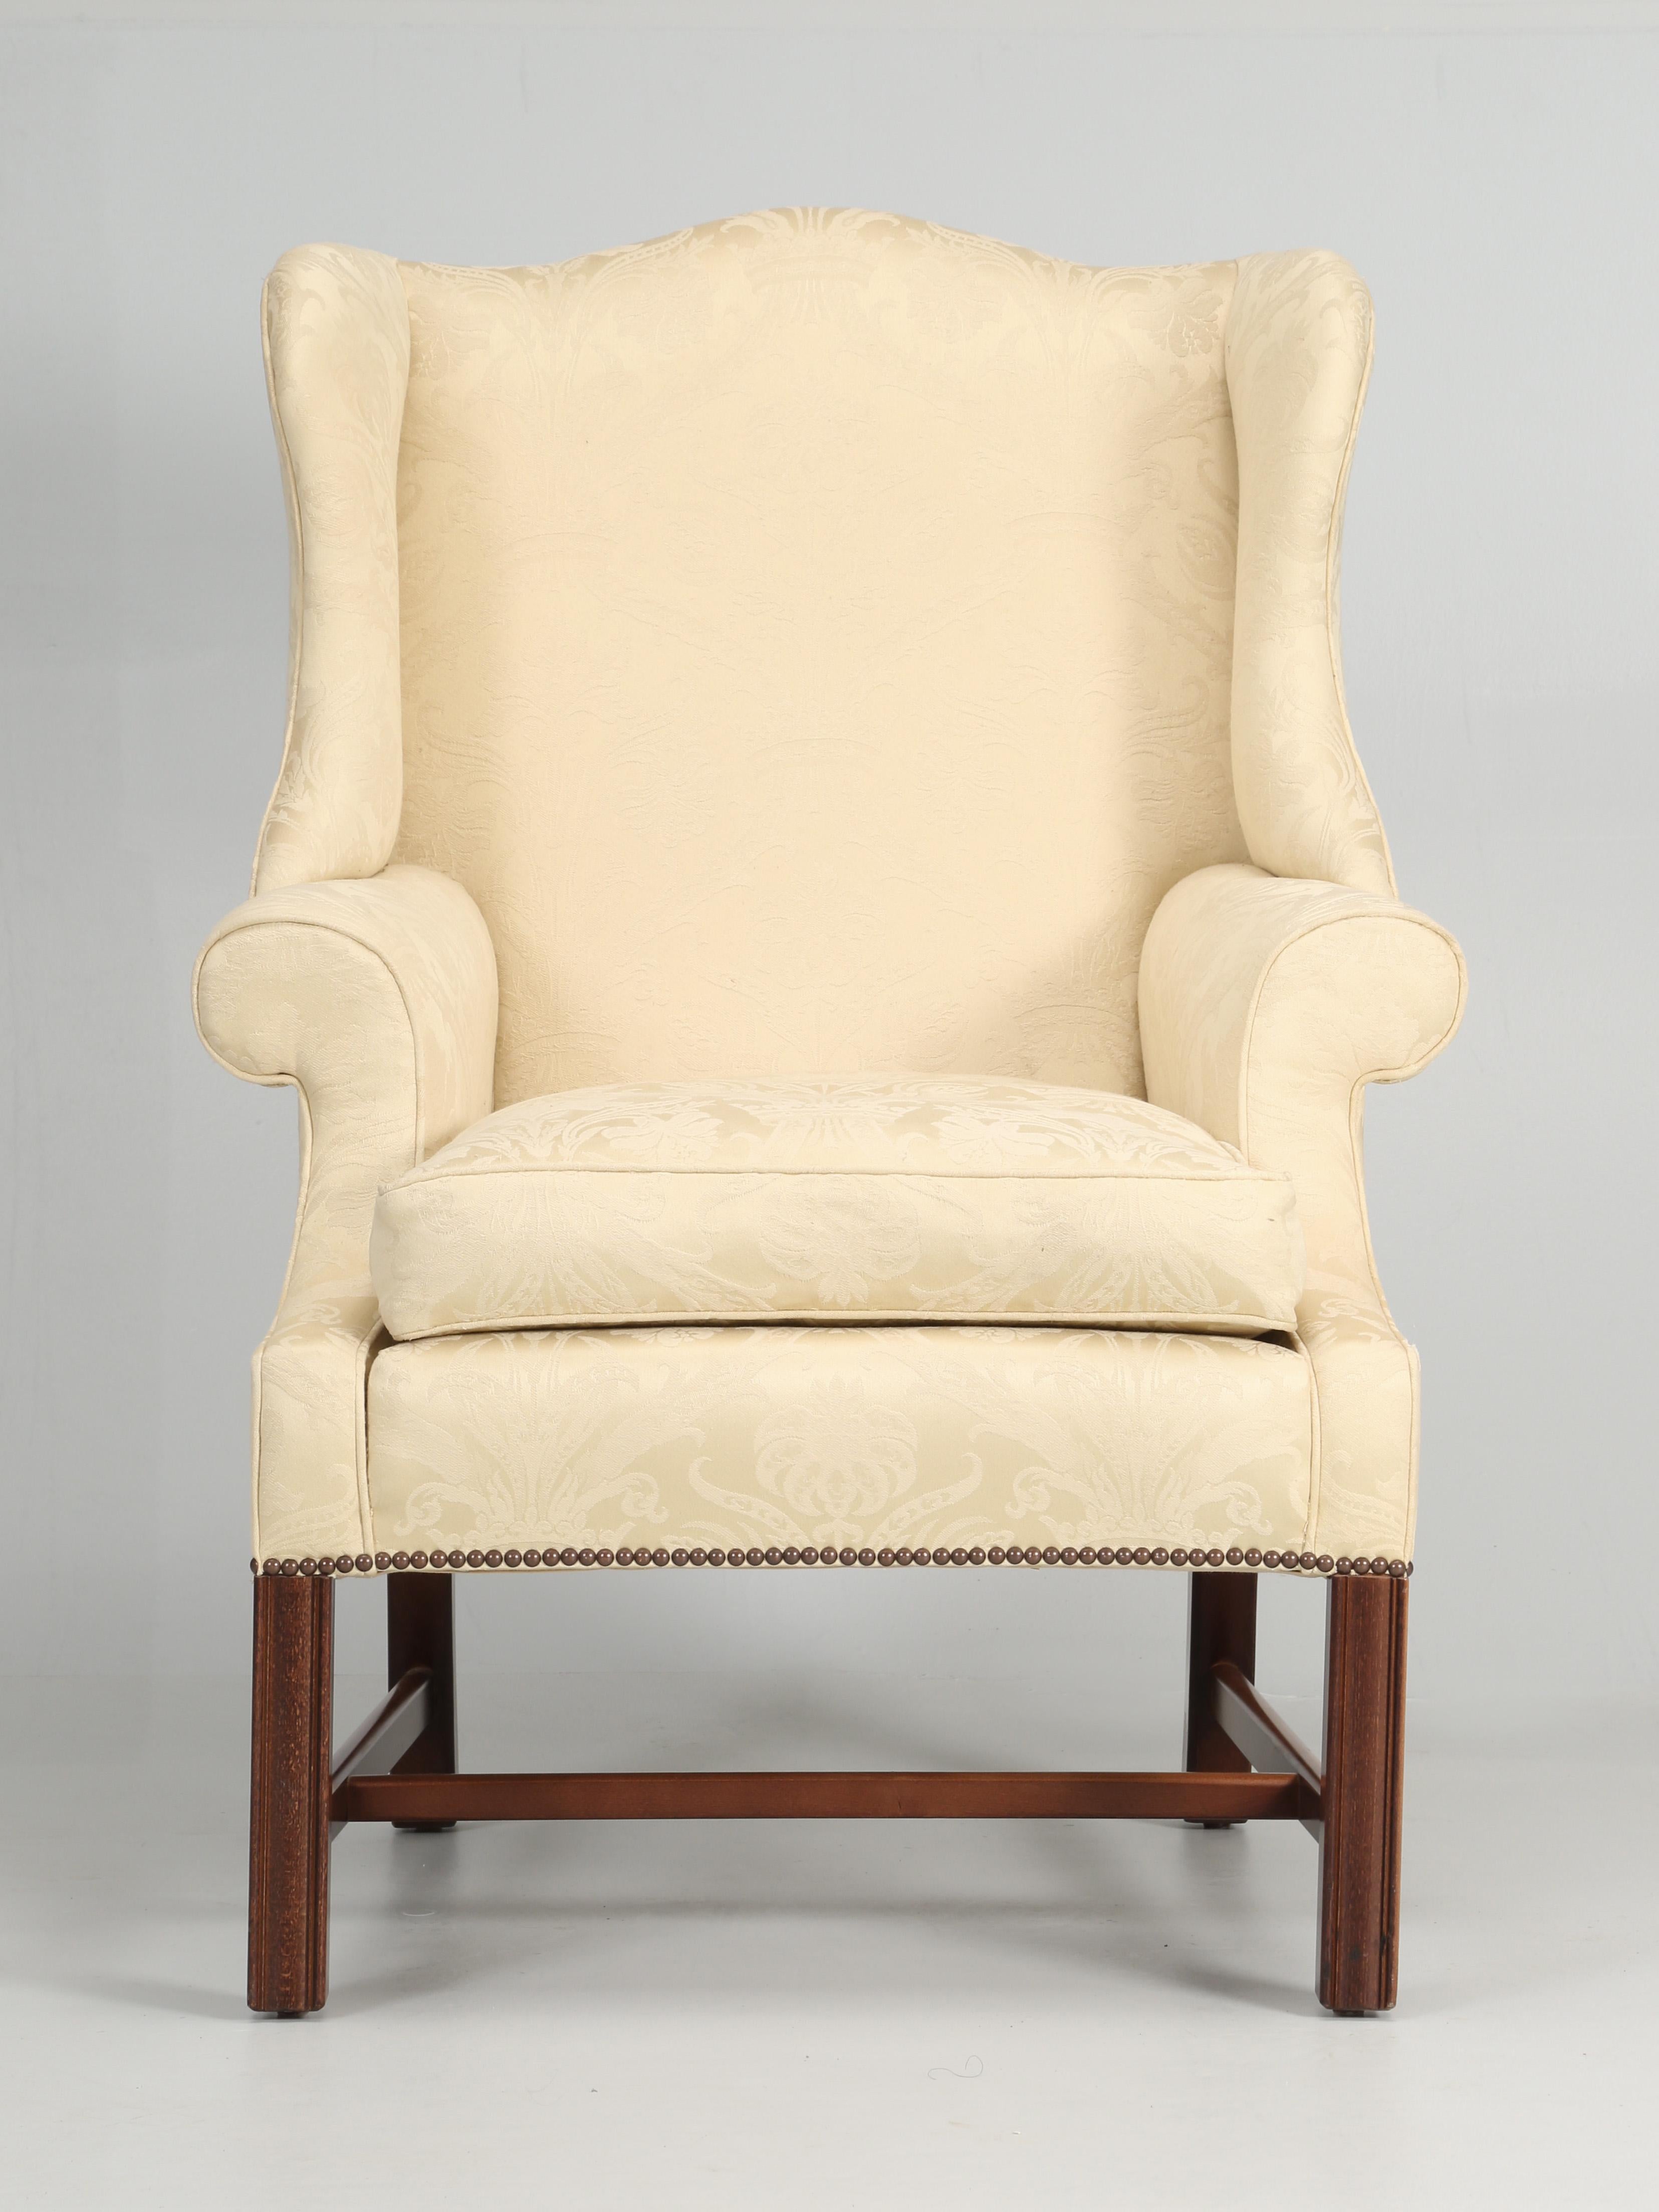 Hand-made English Chippendale style wingback chair of a high quality. The seat cushion is filled with down feathers, as one would expect in a quality wingback and we are guessing that the fabric is original and beginning to show its age. Extremely